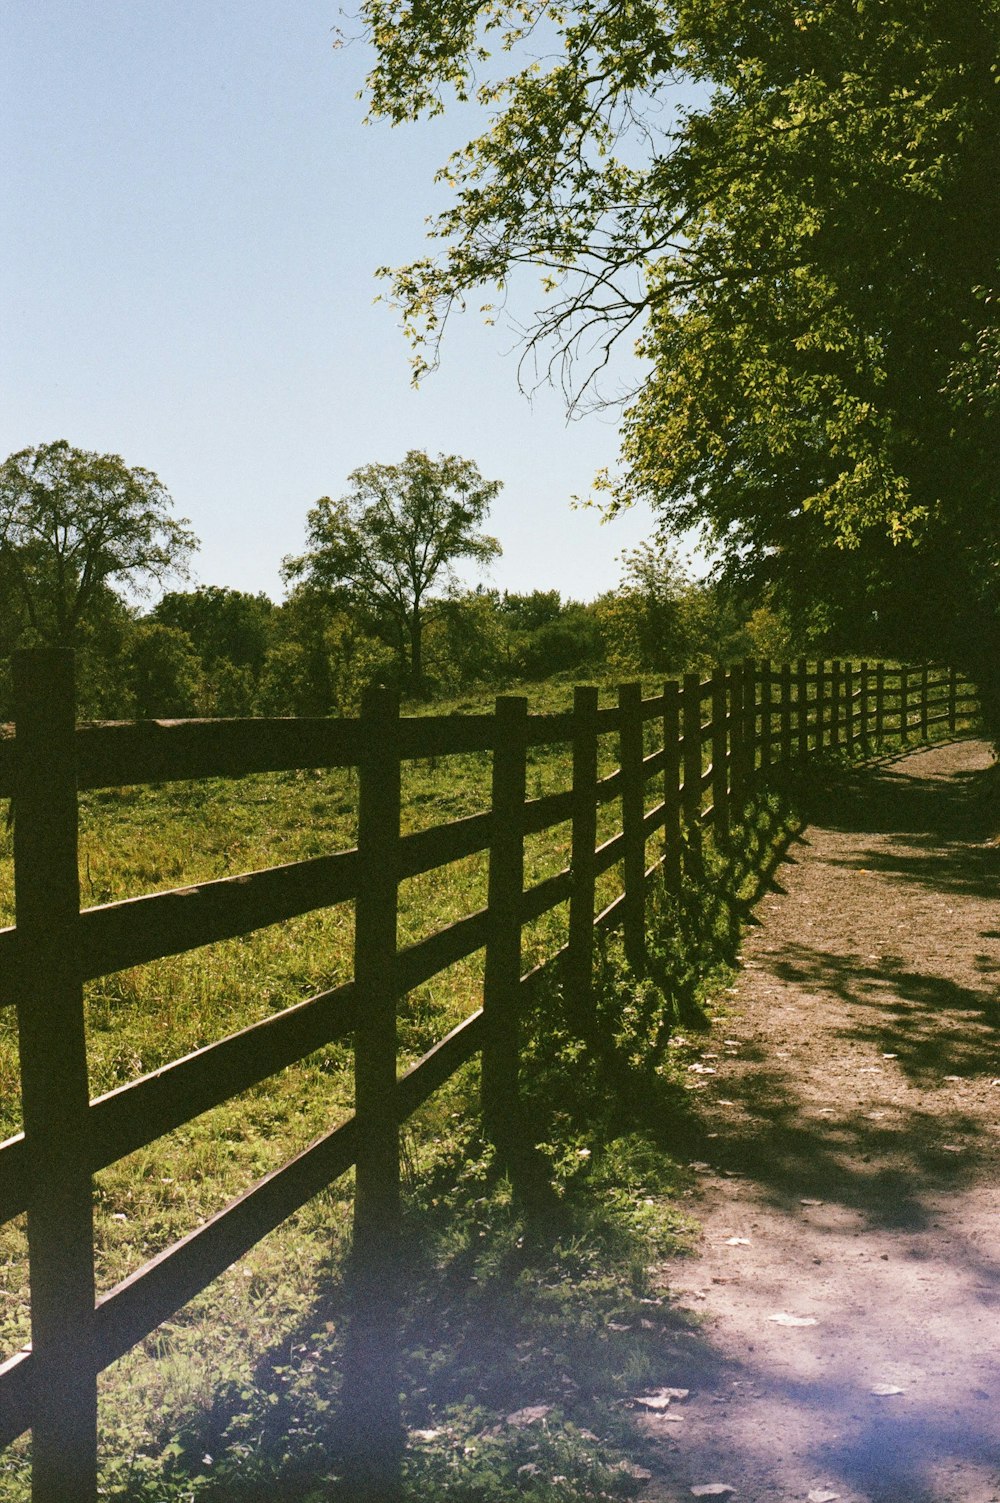 a wooden fence in front of a grassy field